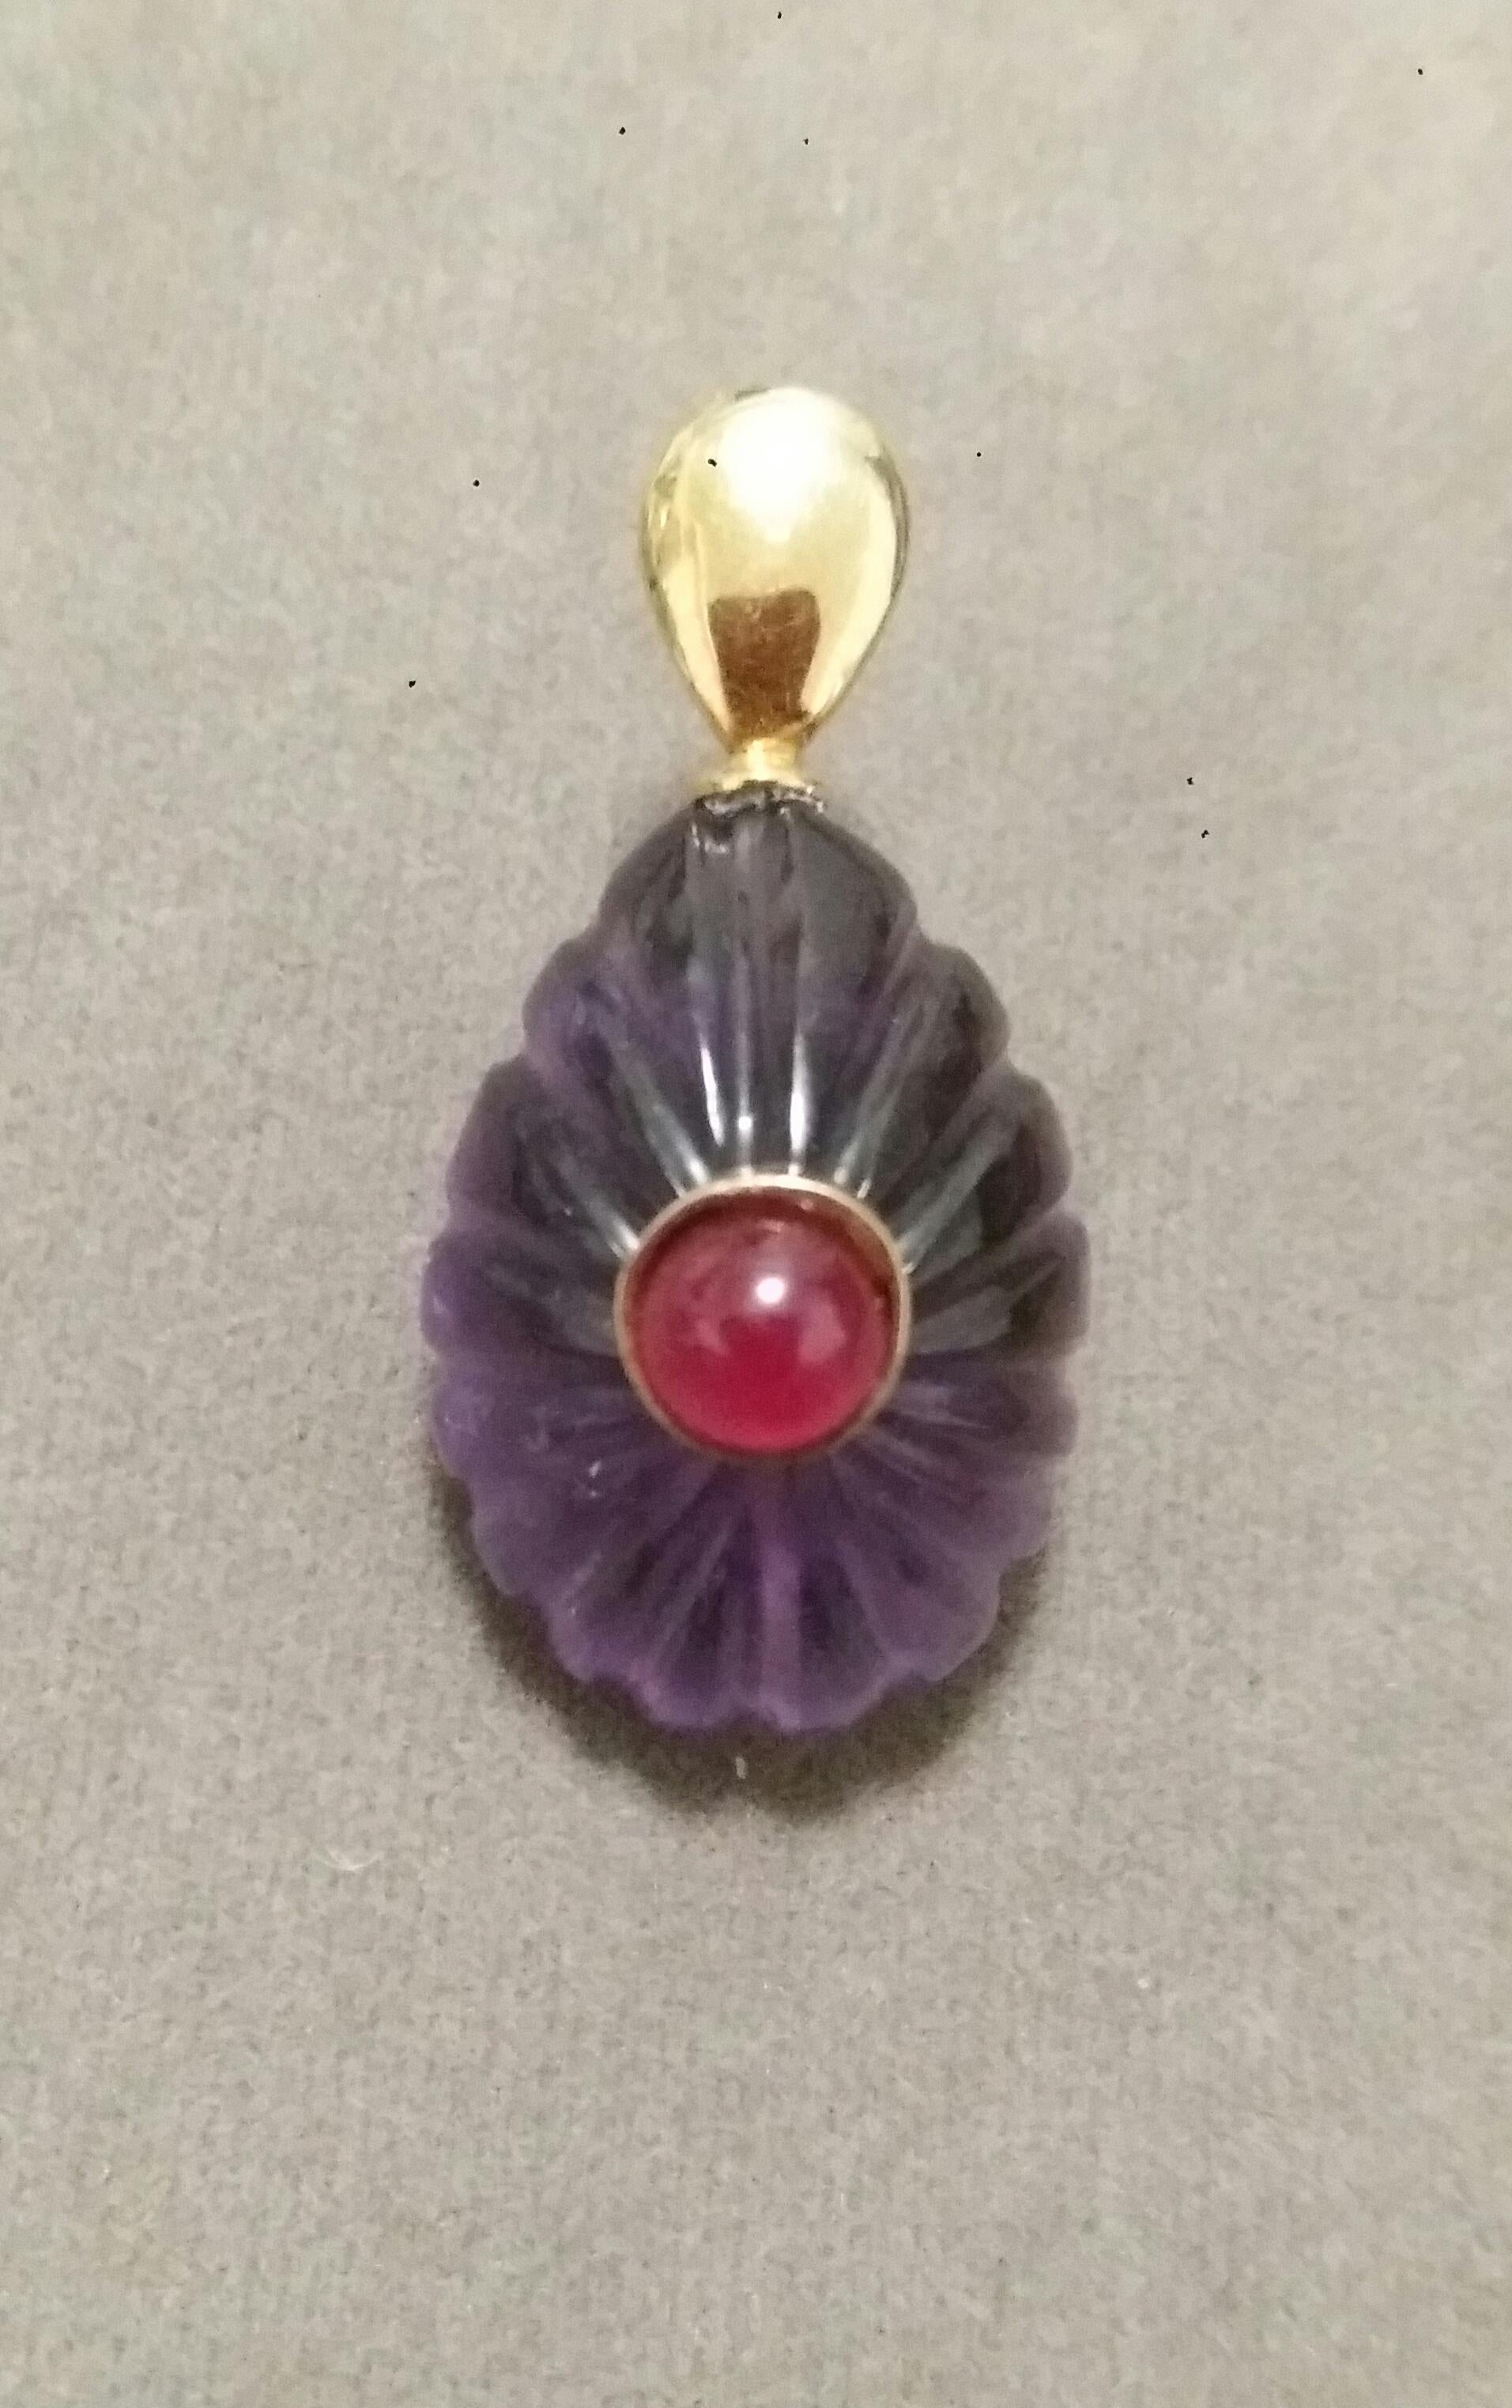 Simple chic Engraved Pear Shape Amethyst pendant measuring 16mm x30 mm set in solid 14 Kt. yellow gold hook and with a Round Shape Plain Ruby Cab  in the center,set in a 14k yellow gold bezel
In 1978 our workshop started in Italy to make simple-chic